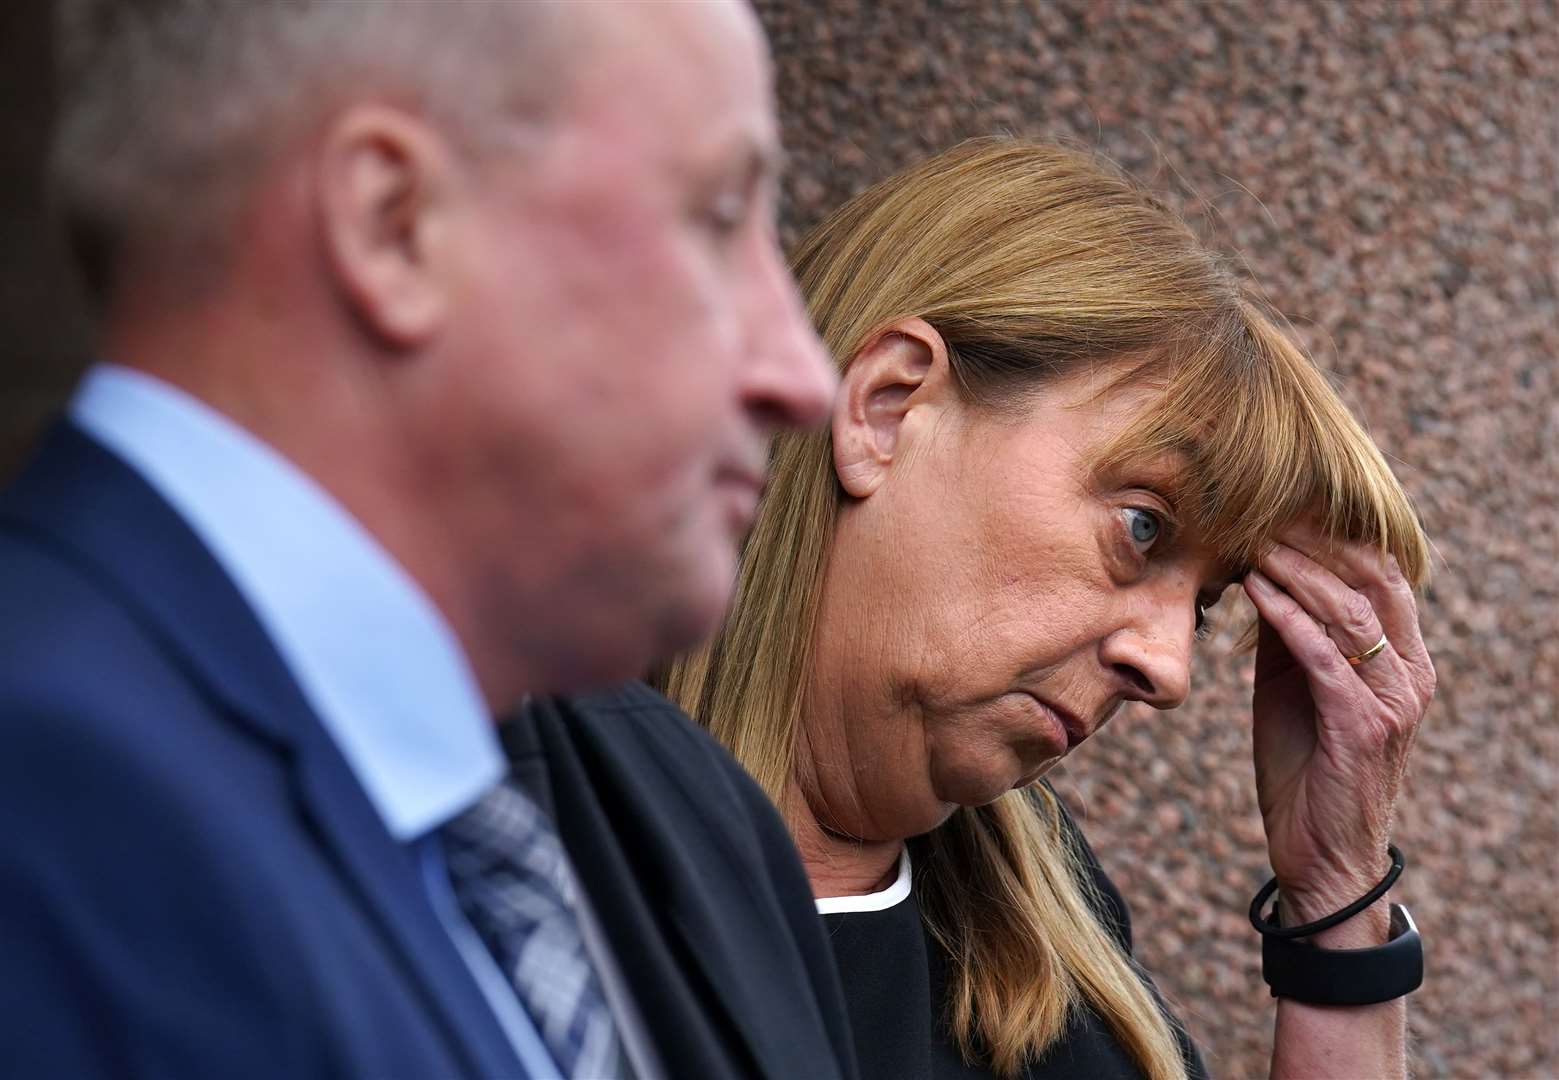 Katie Allan’s parents have long campaigned for justice (Andrew Milligan/PA)